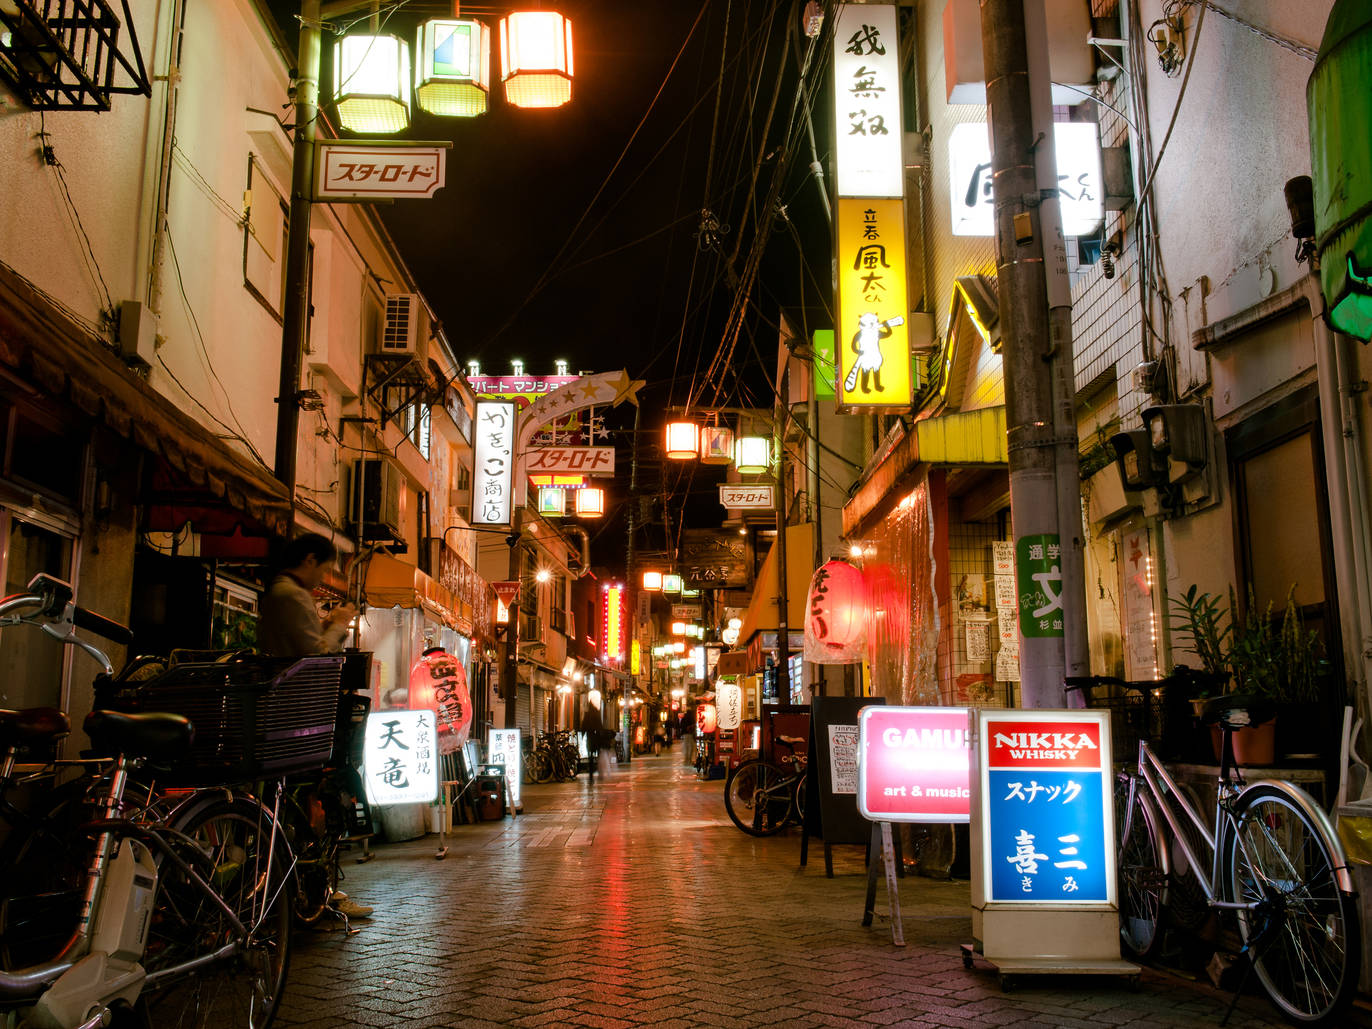 50 things to do in Koenji | Time Out Tokyo